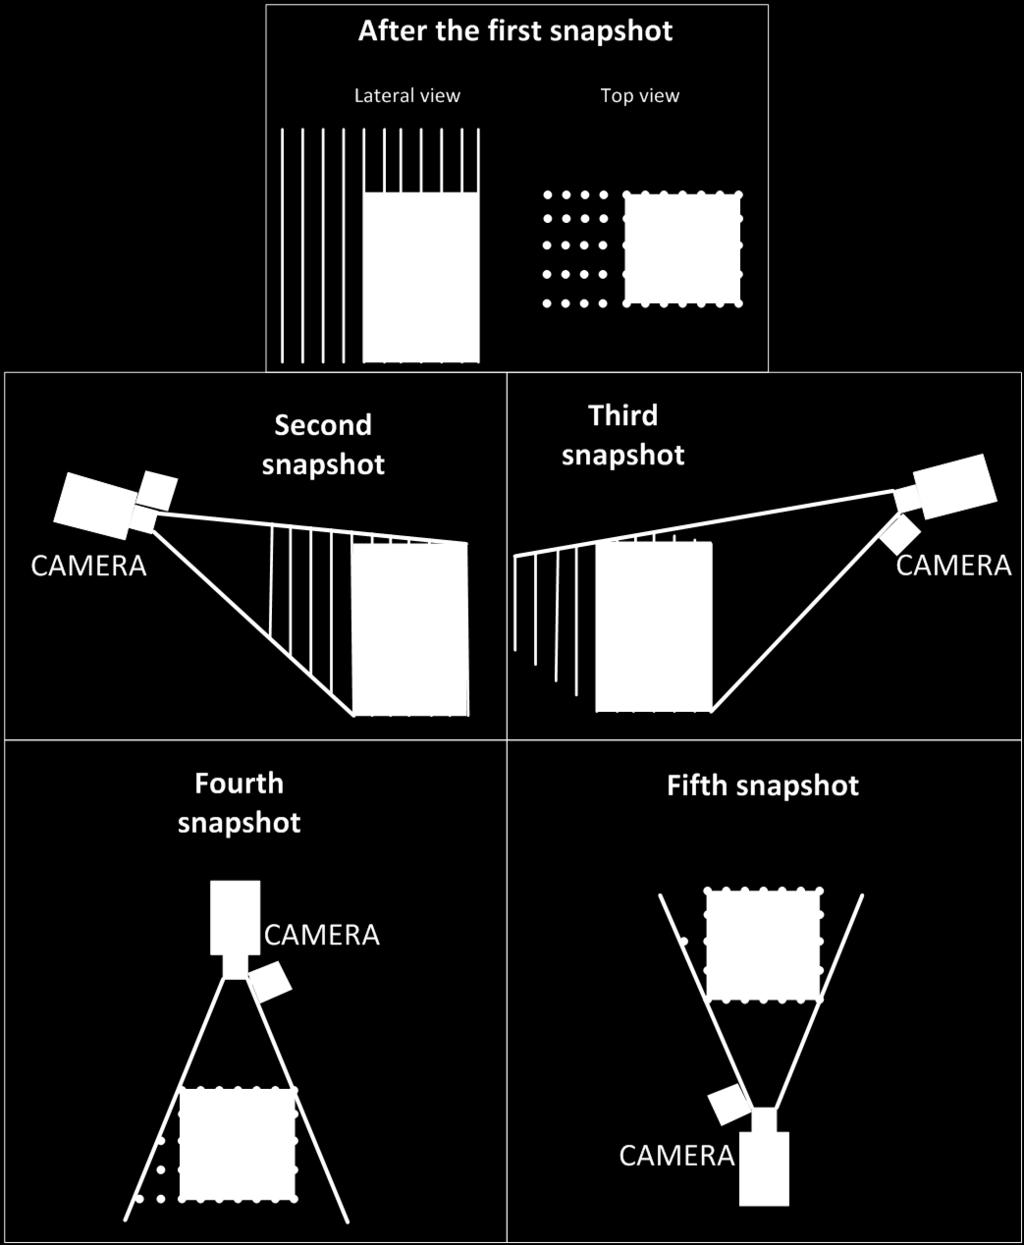 The following step is to use the snapshots from other angles to obtain the silhouettes of the objects from different points of view.